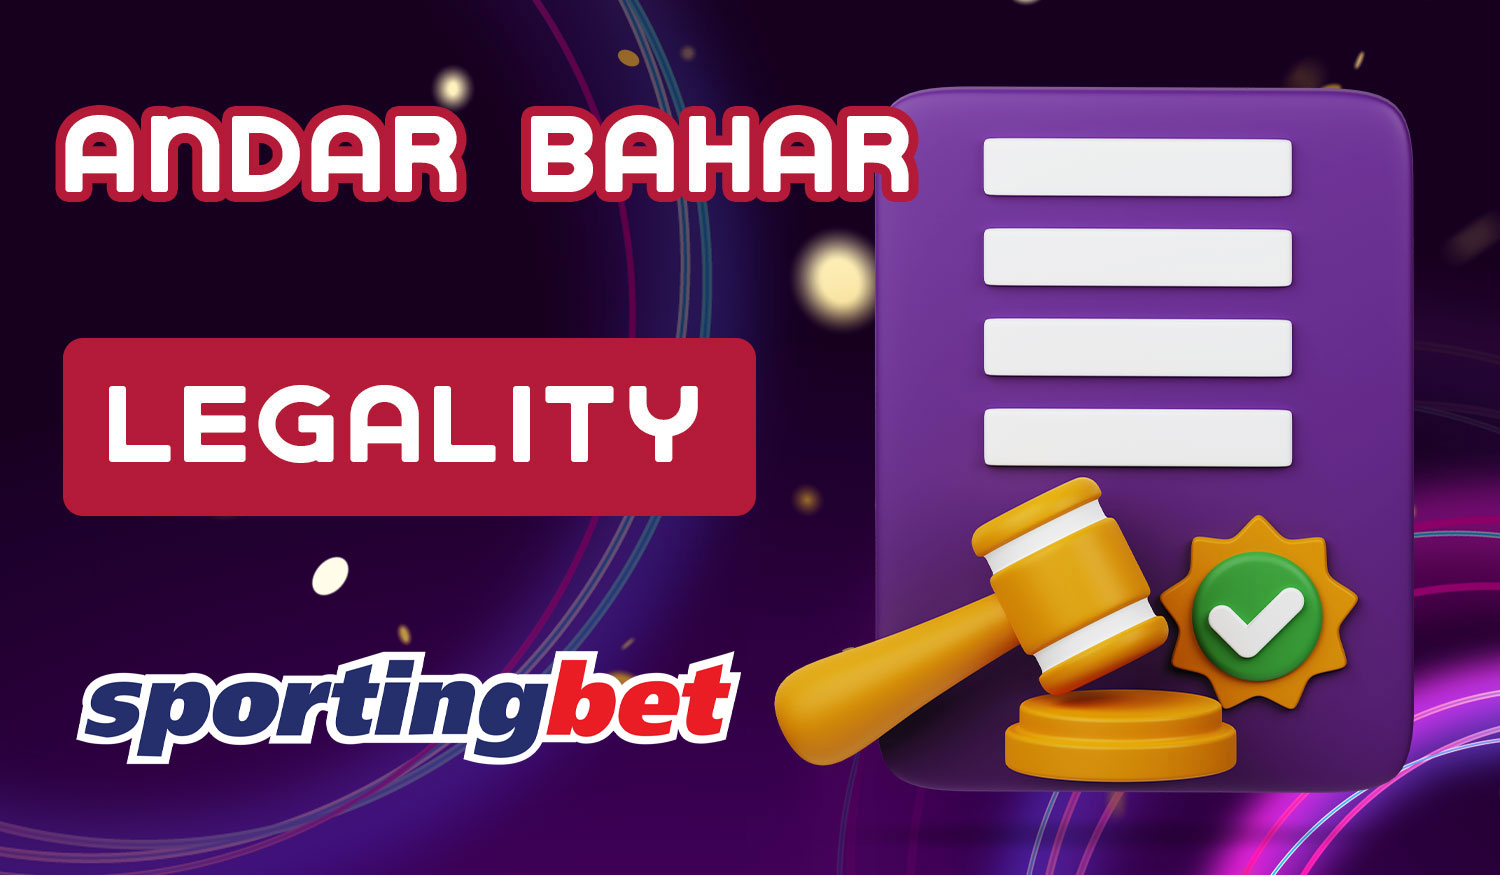 The legality of Sportingbet's operations in India